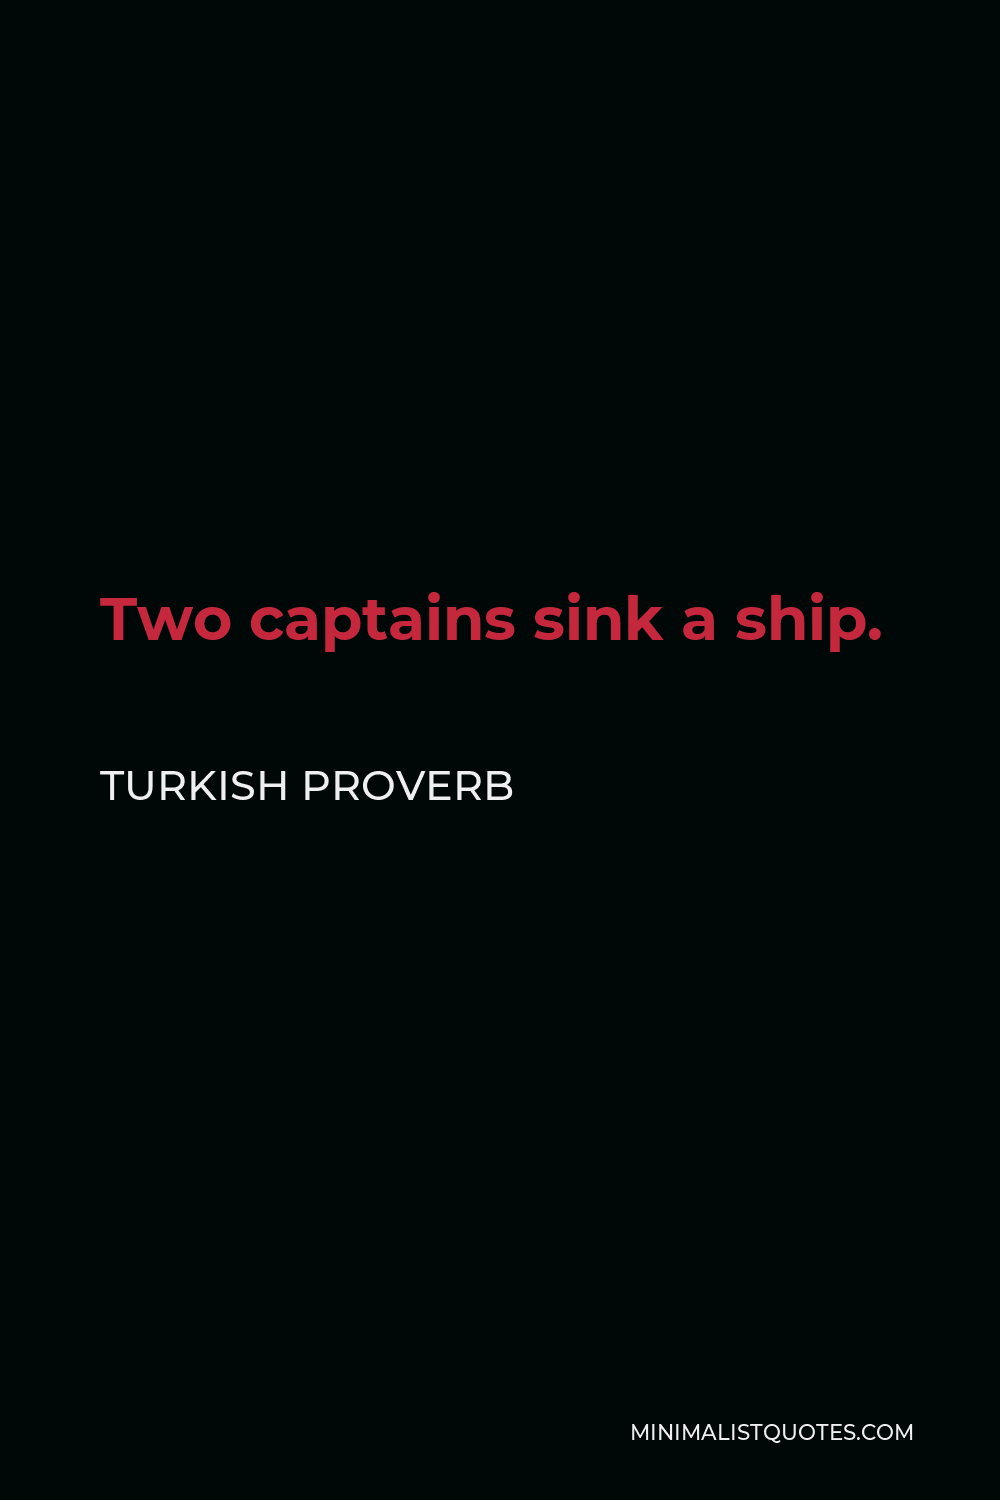 Turkish Proverb Quote - Two captains sink a ship.